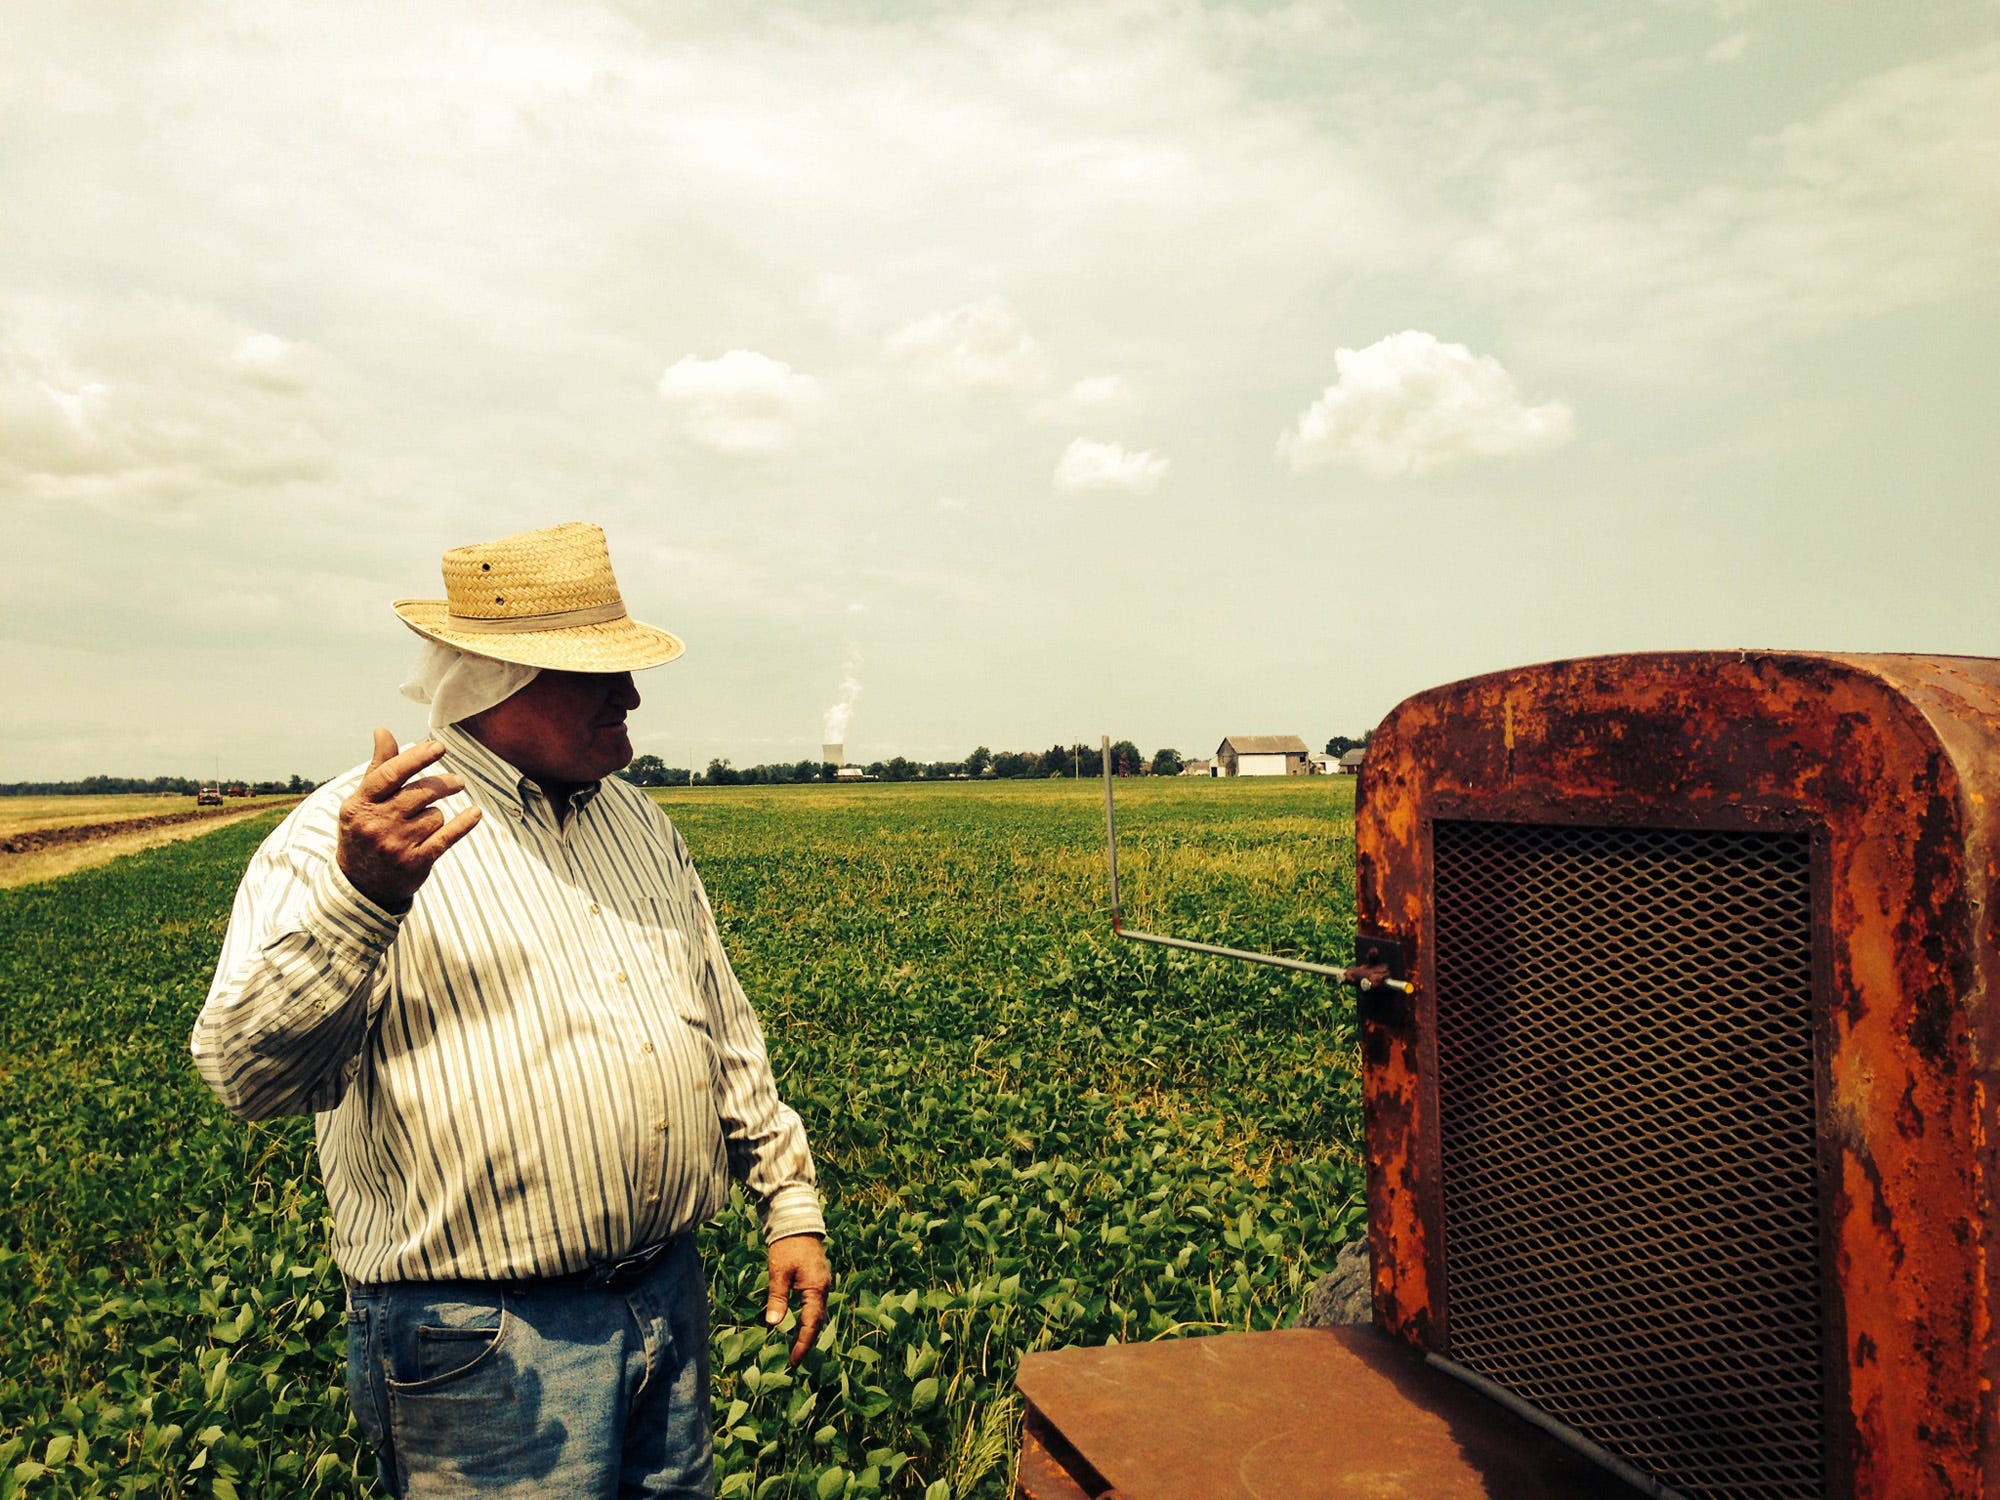 Richard Thorbahn, a retired school administrator and trustee for the Carroll Township Water and Sewer District east of Toledo, works in a field several miles south of Lake Erie using a 1950s-era tractor guided by lasers to install drain tiles.